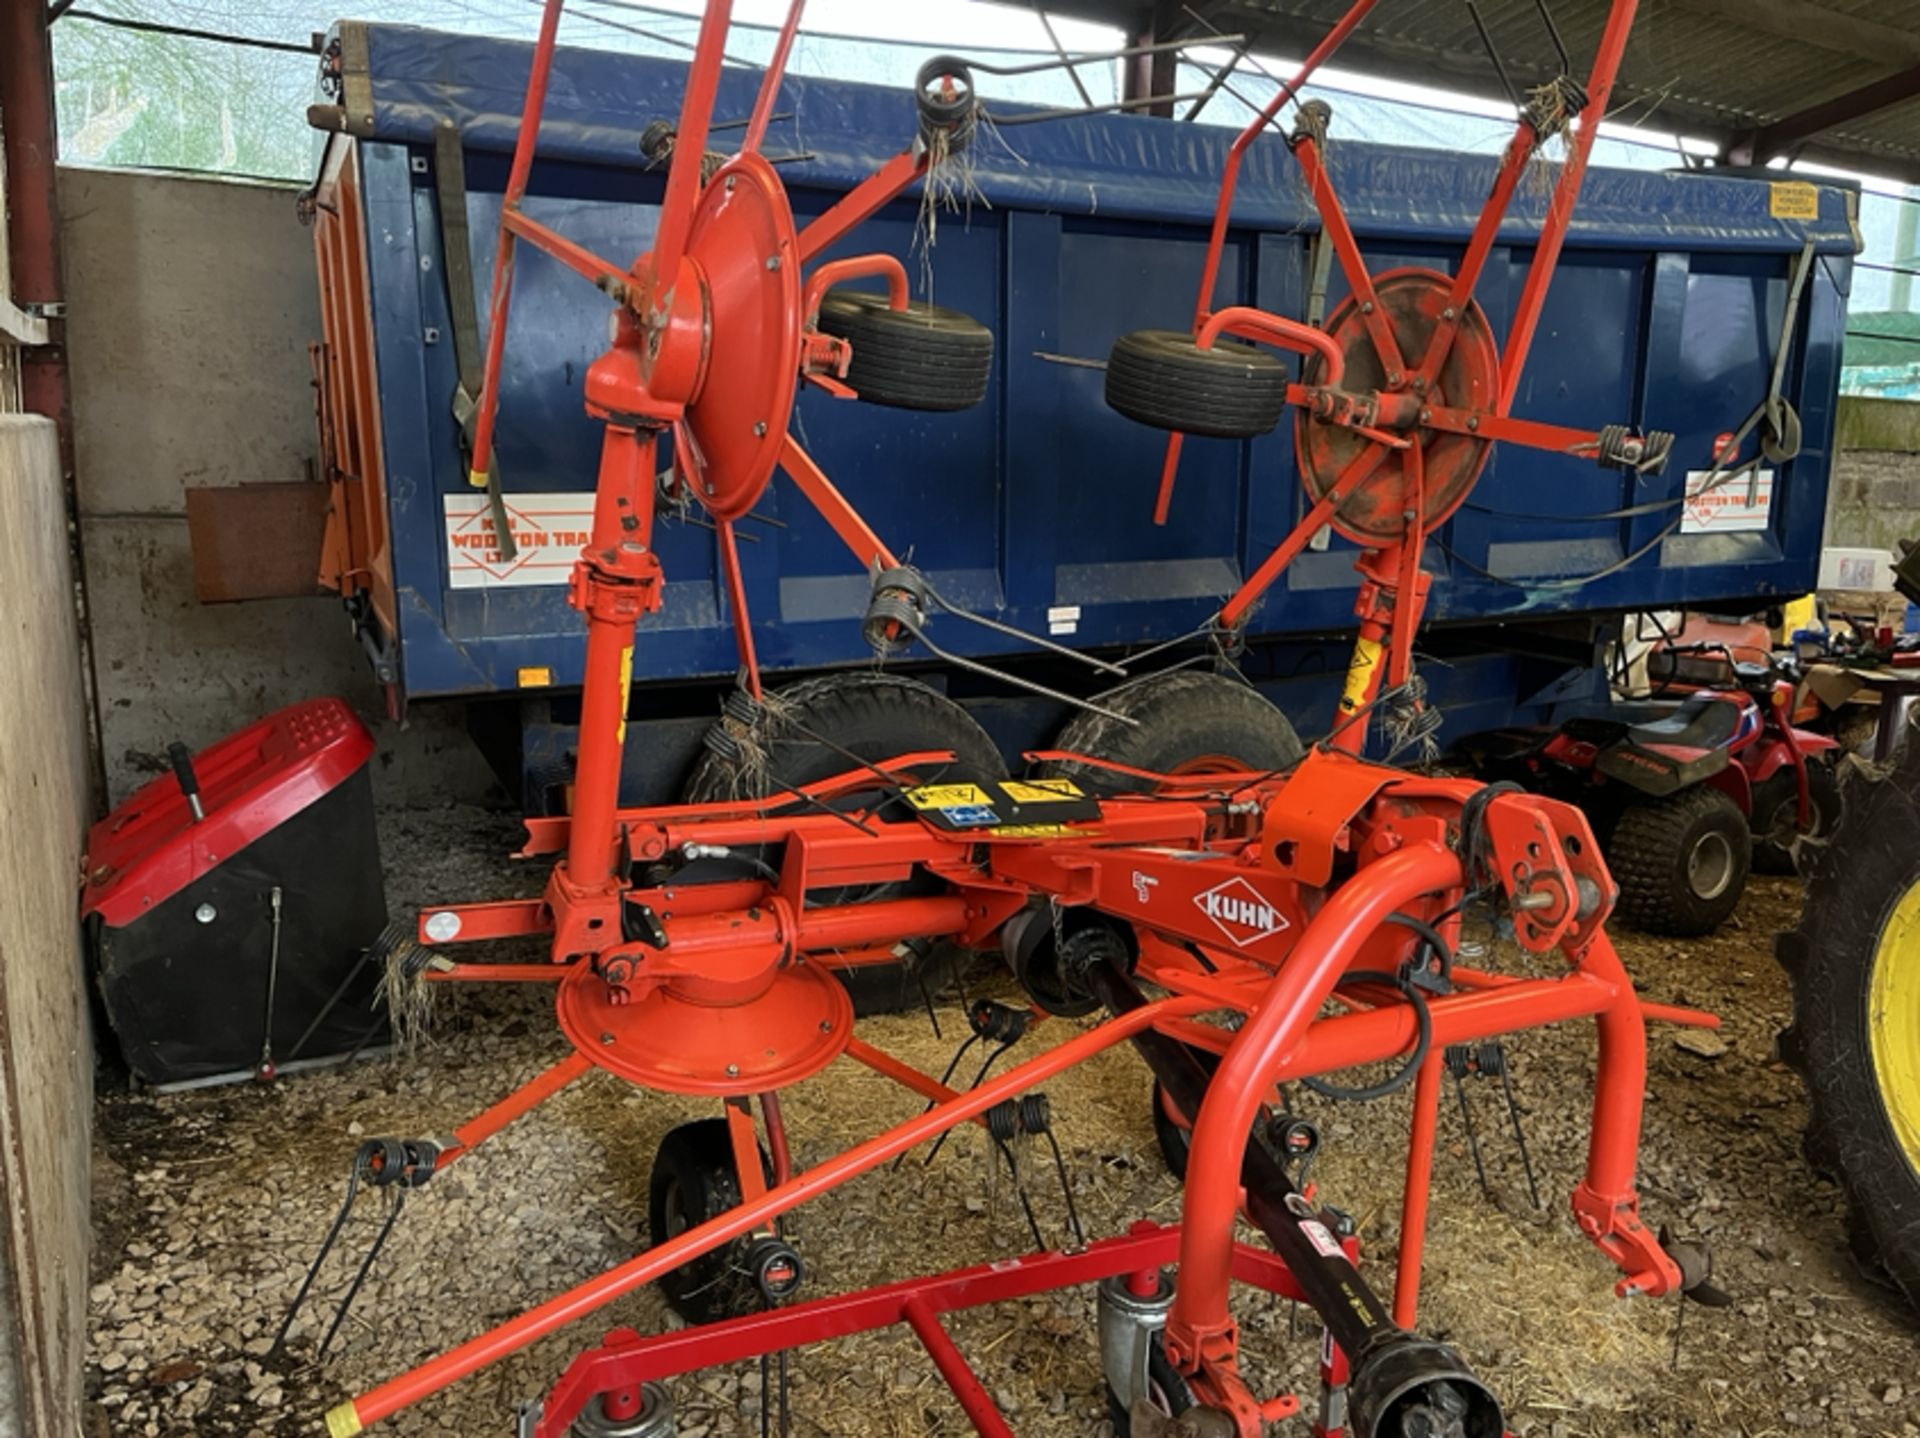 Kuhn gf502 4 rotor Tedder in excellent condition plus vat - Image 2 of 3